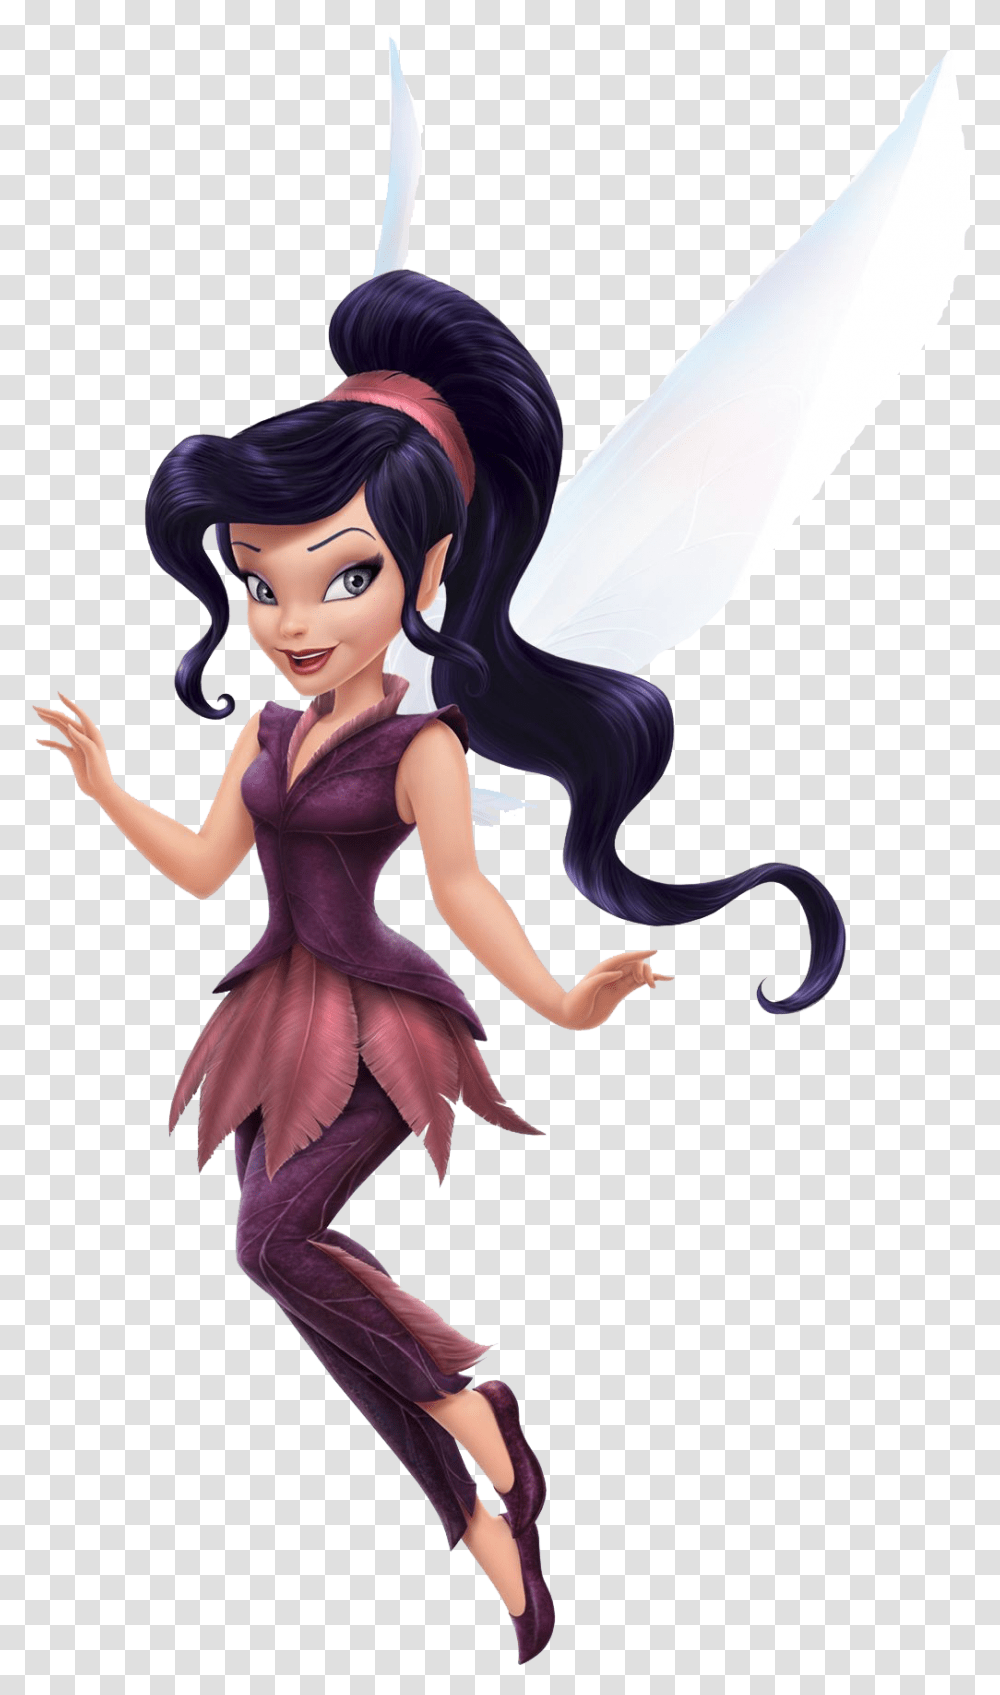 Tinkerbell Vidia Free Pic Vidia Tinkerbell Fairies, Person, Dance Pose, Leisure Activities Transparent Png